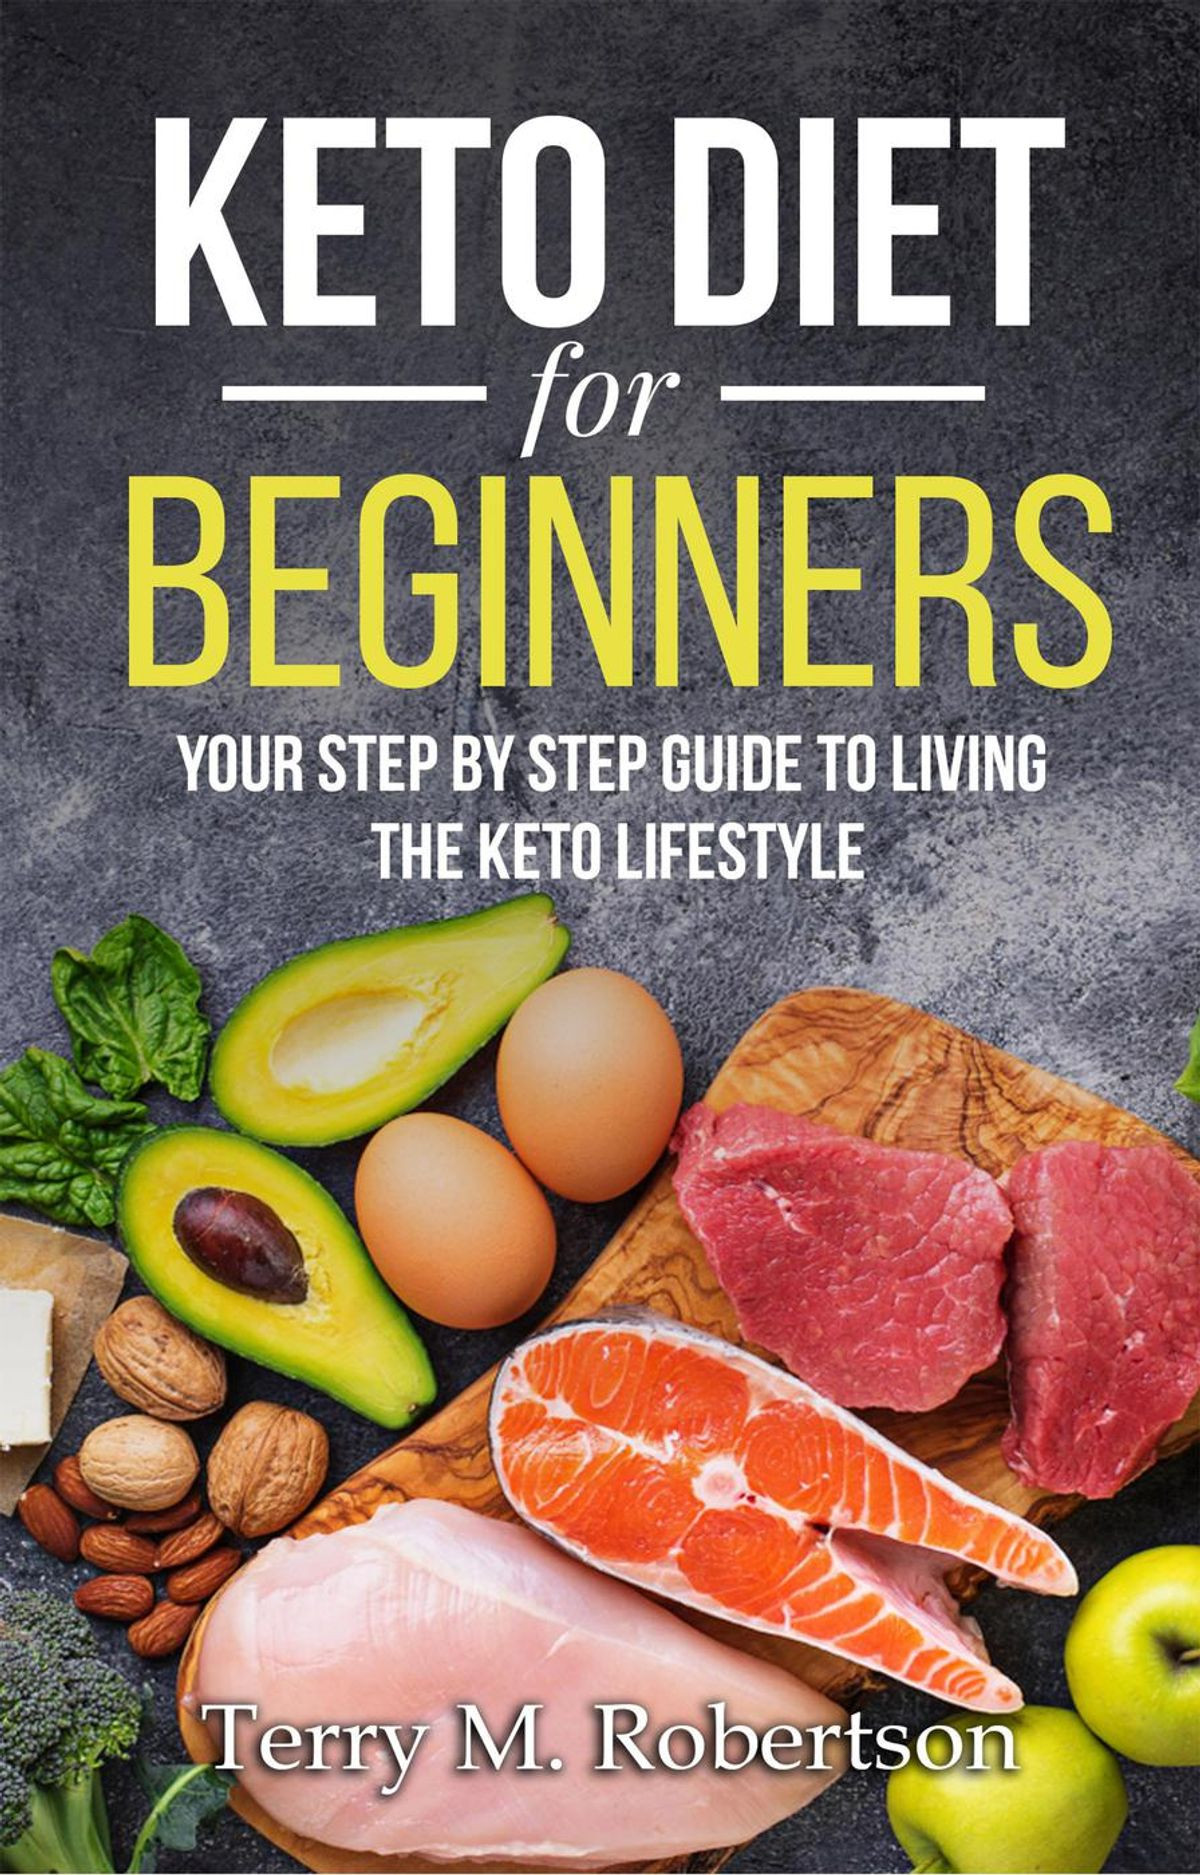 Step By Step Keto For Beginners
 Keto Diet for Beginners Your Step by Step Guide to Living